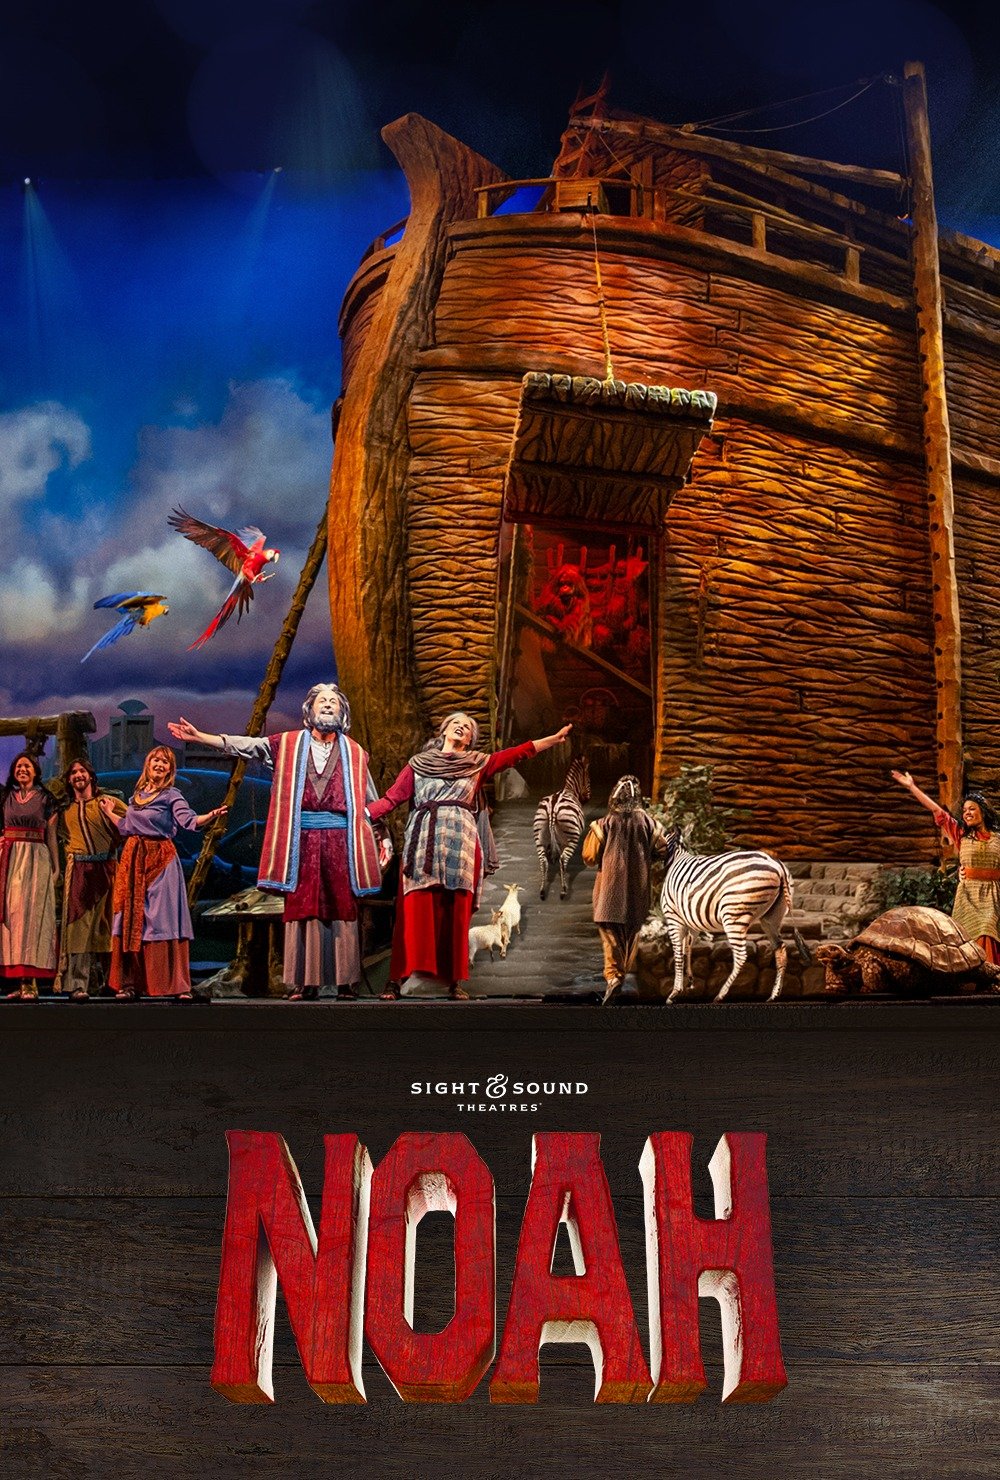 NOAH (2019) Movieguide Movie Reviews for Families